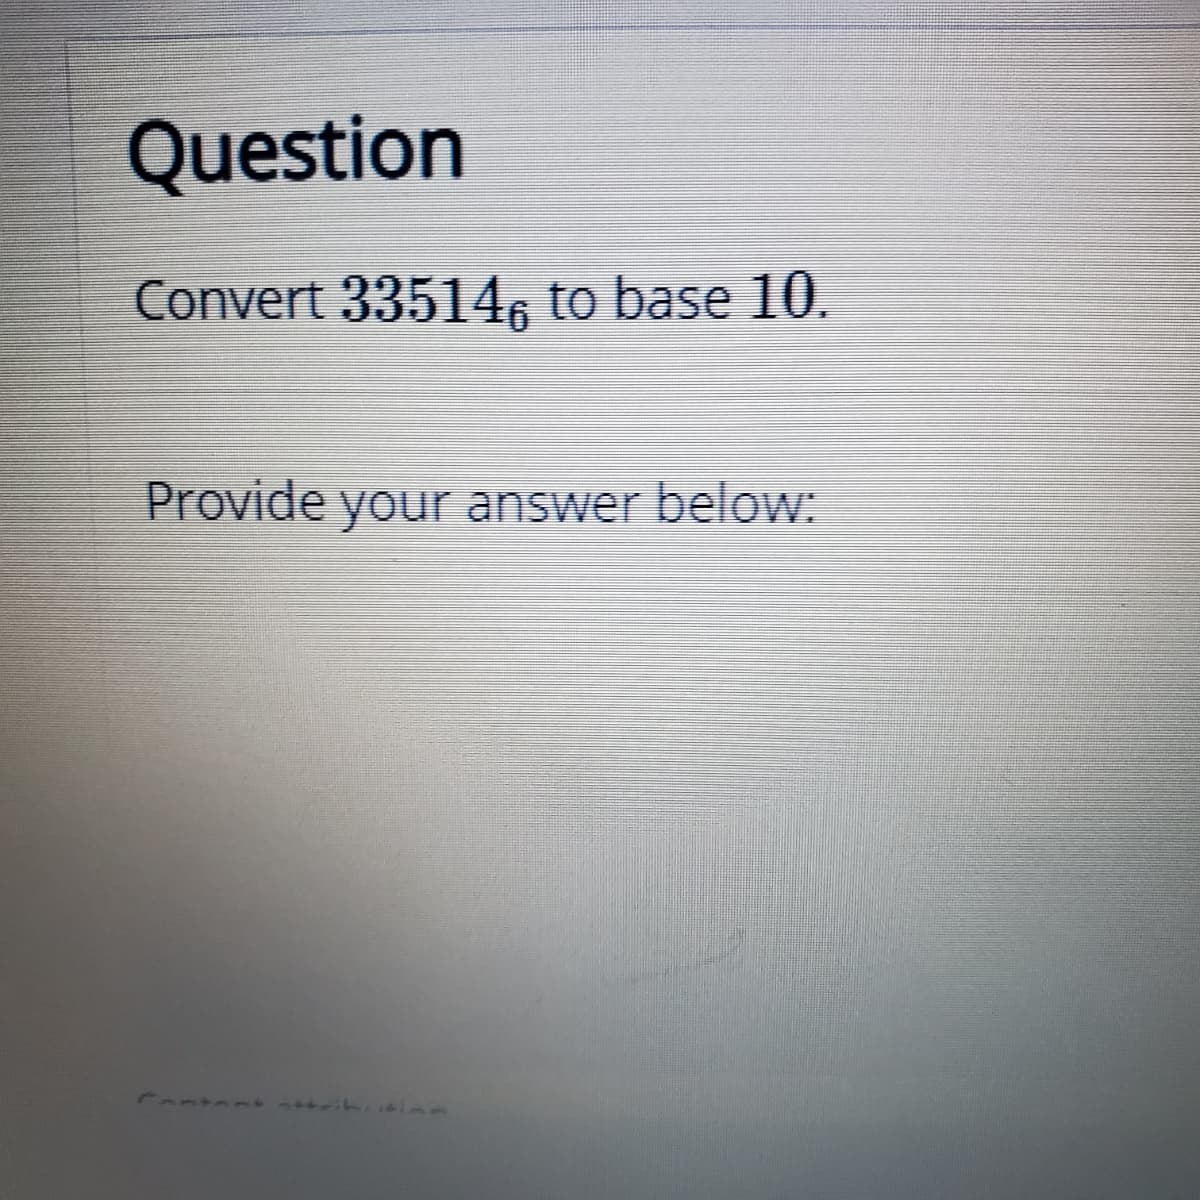 Question
Convert 33514, to base 10.
Provide your answer below:
Canten
